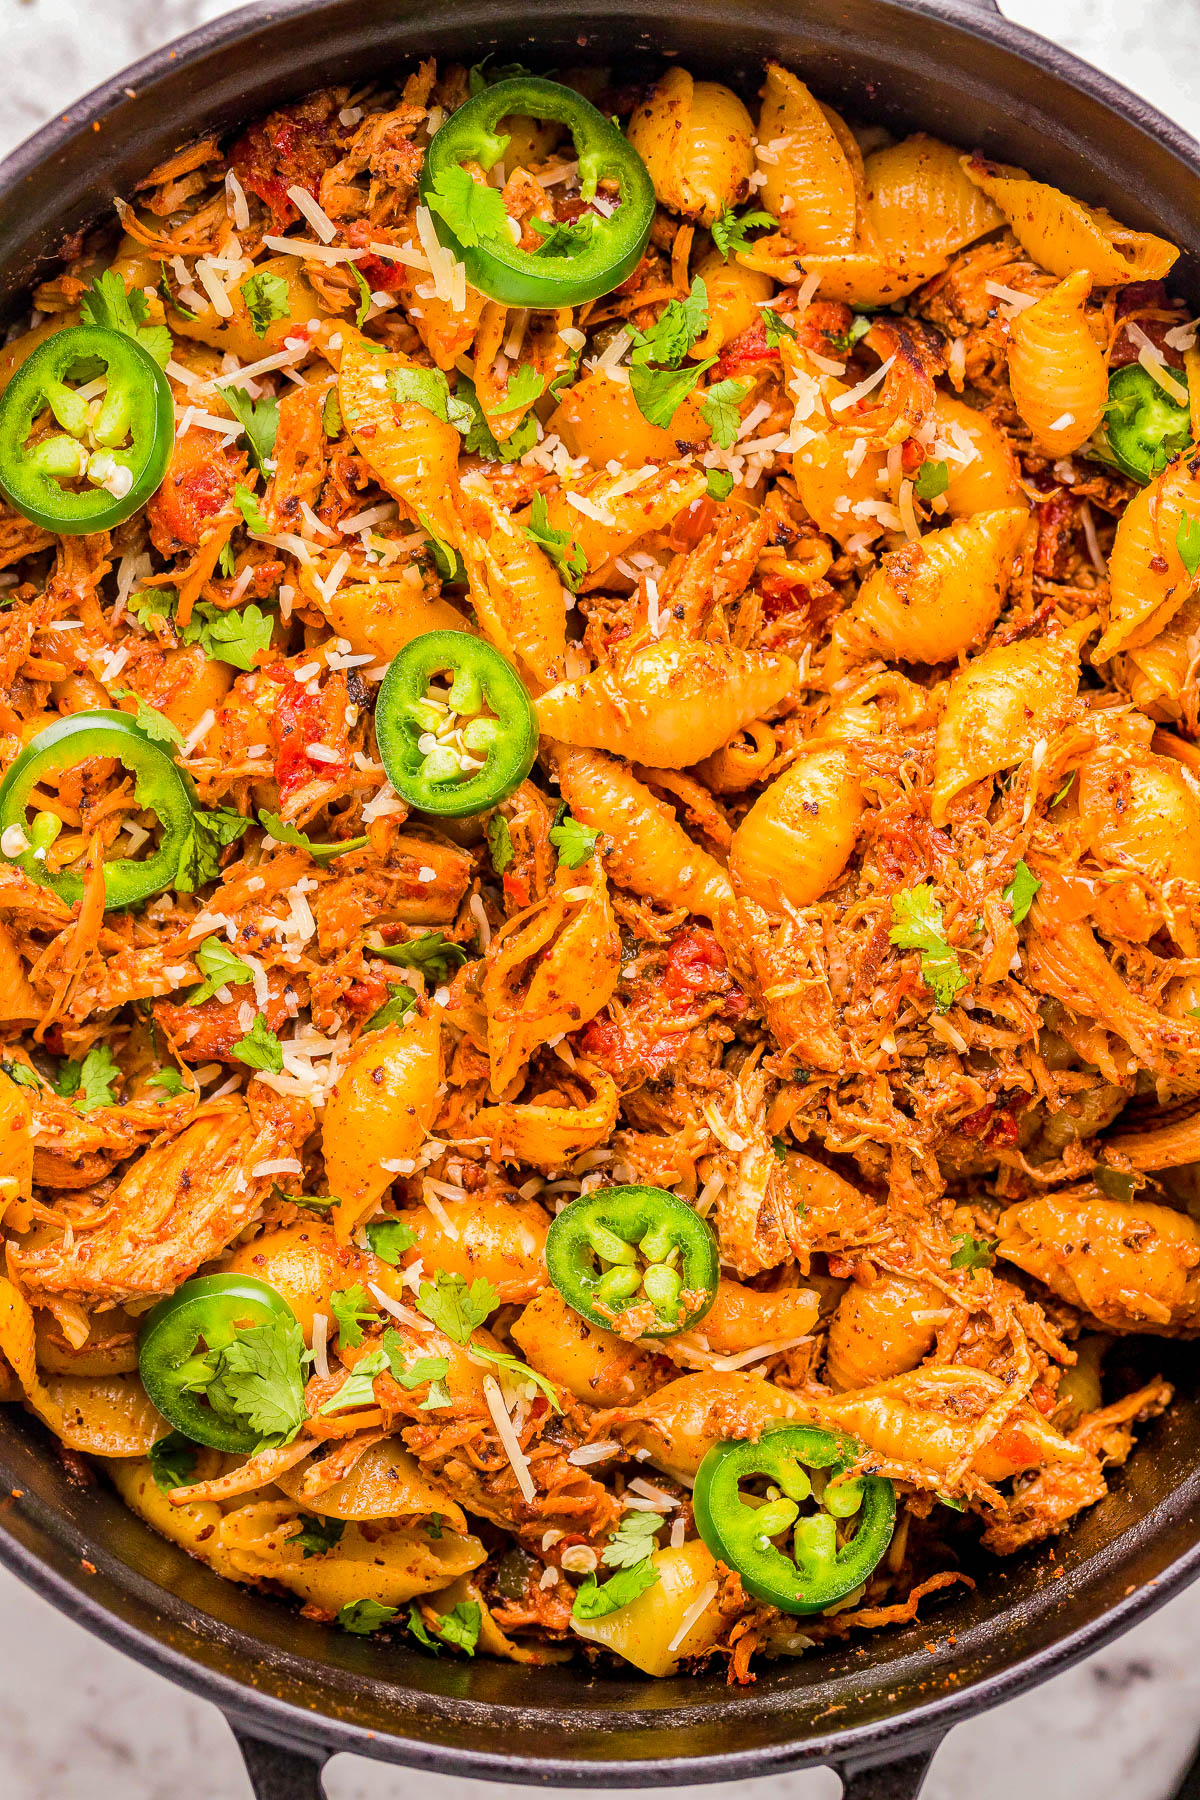 Chicken Chorizo Pasta - Tender pasta shells are mixed with chorizo and seasoned shredded chicken in a cream cheese and tomato based sauce for a truly FLAVORFUL comfort food dinner recipe! Ready in 45 minutes, EASY, and with just the right amount of heat to have everyone asking for seconds! 